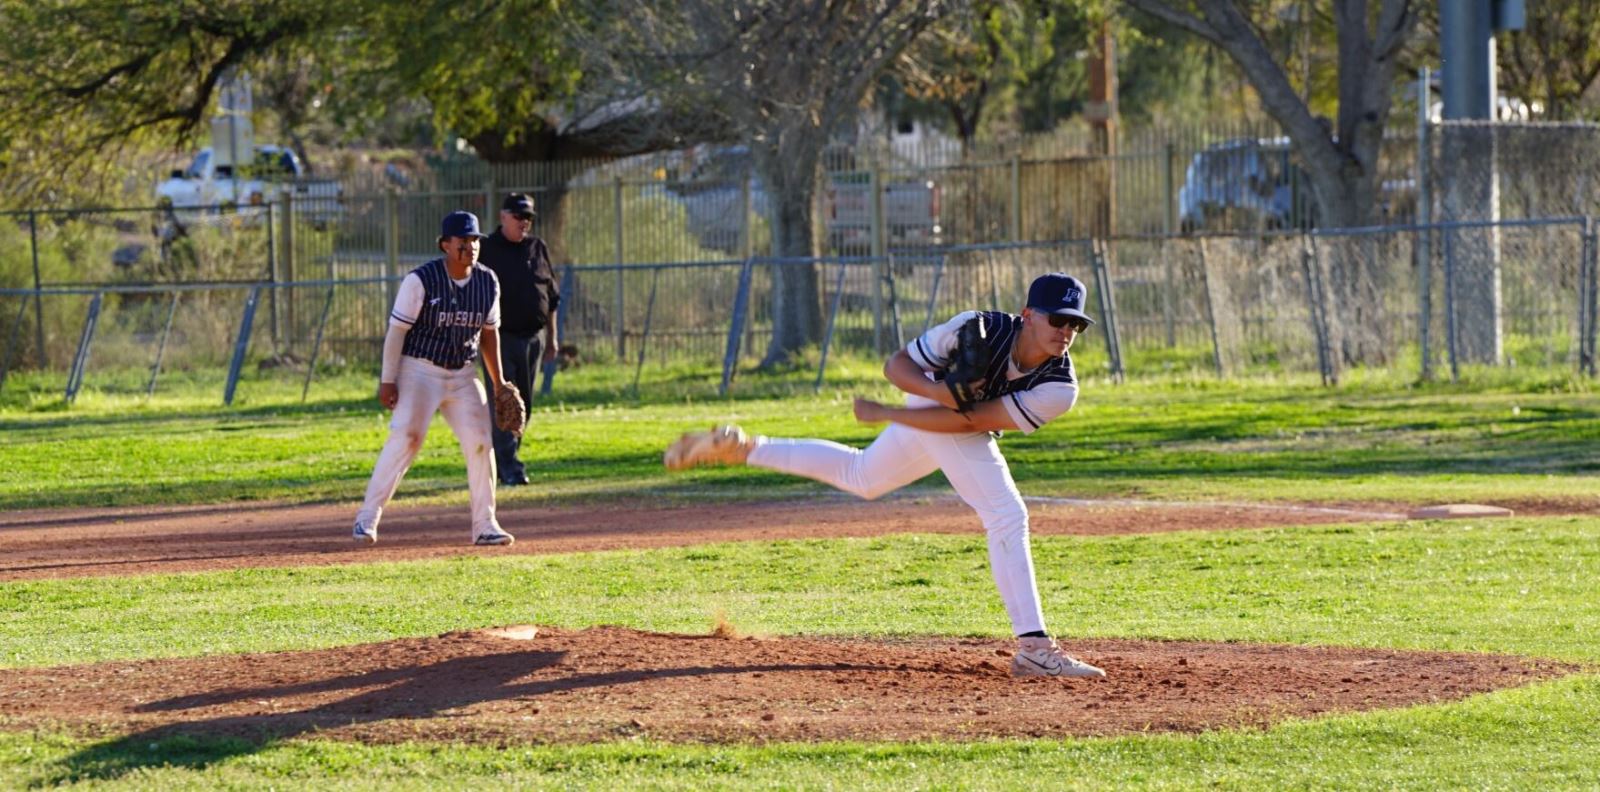 A Pueblo baseball players throws a pitch